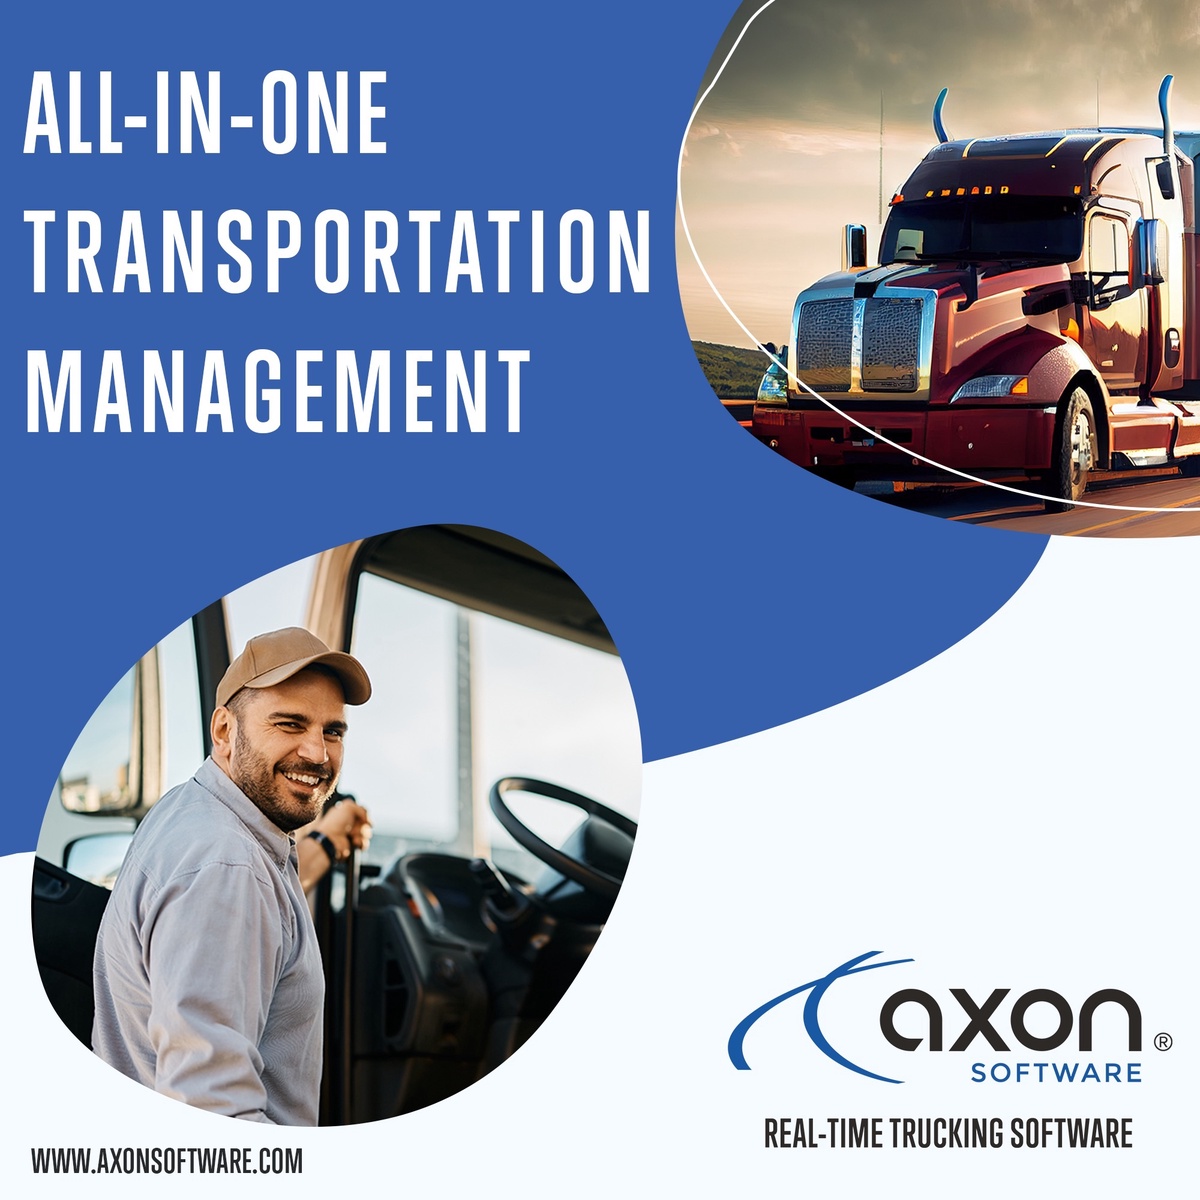 Streamline Your Shipping Operations with Truck Management and Tracking Software